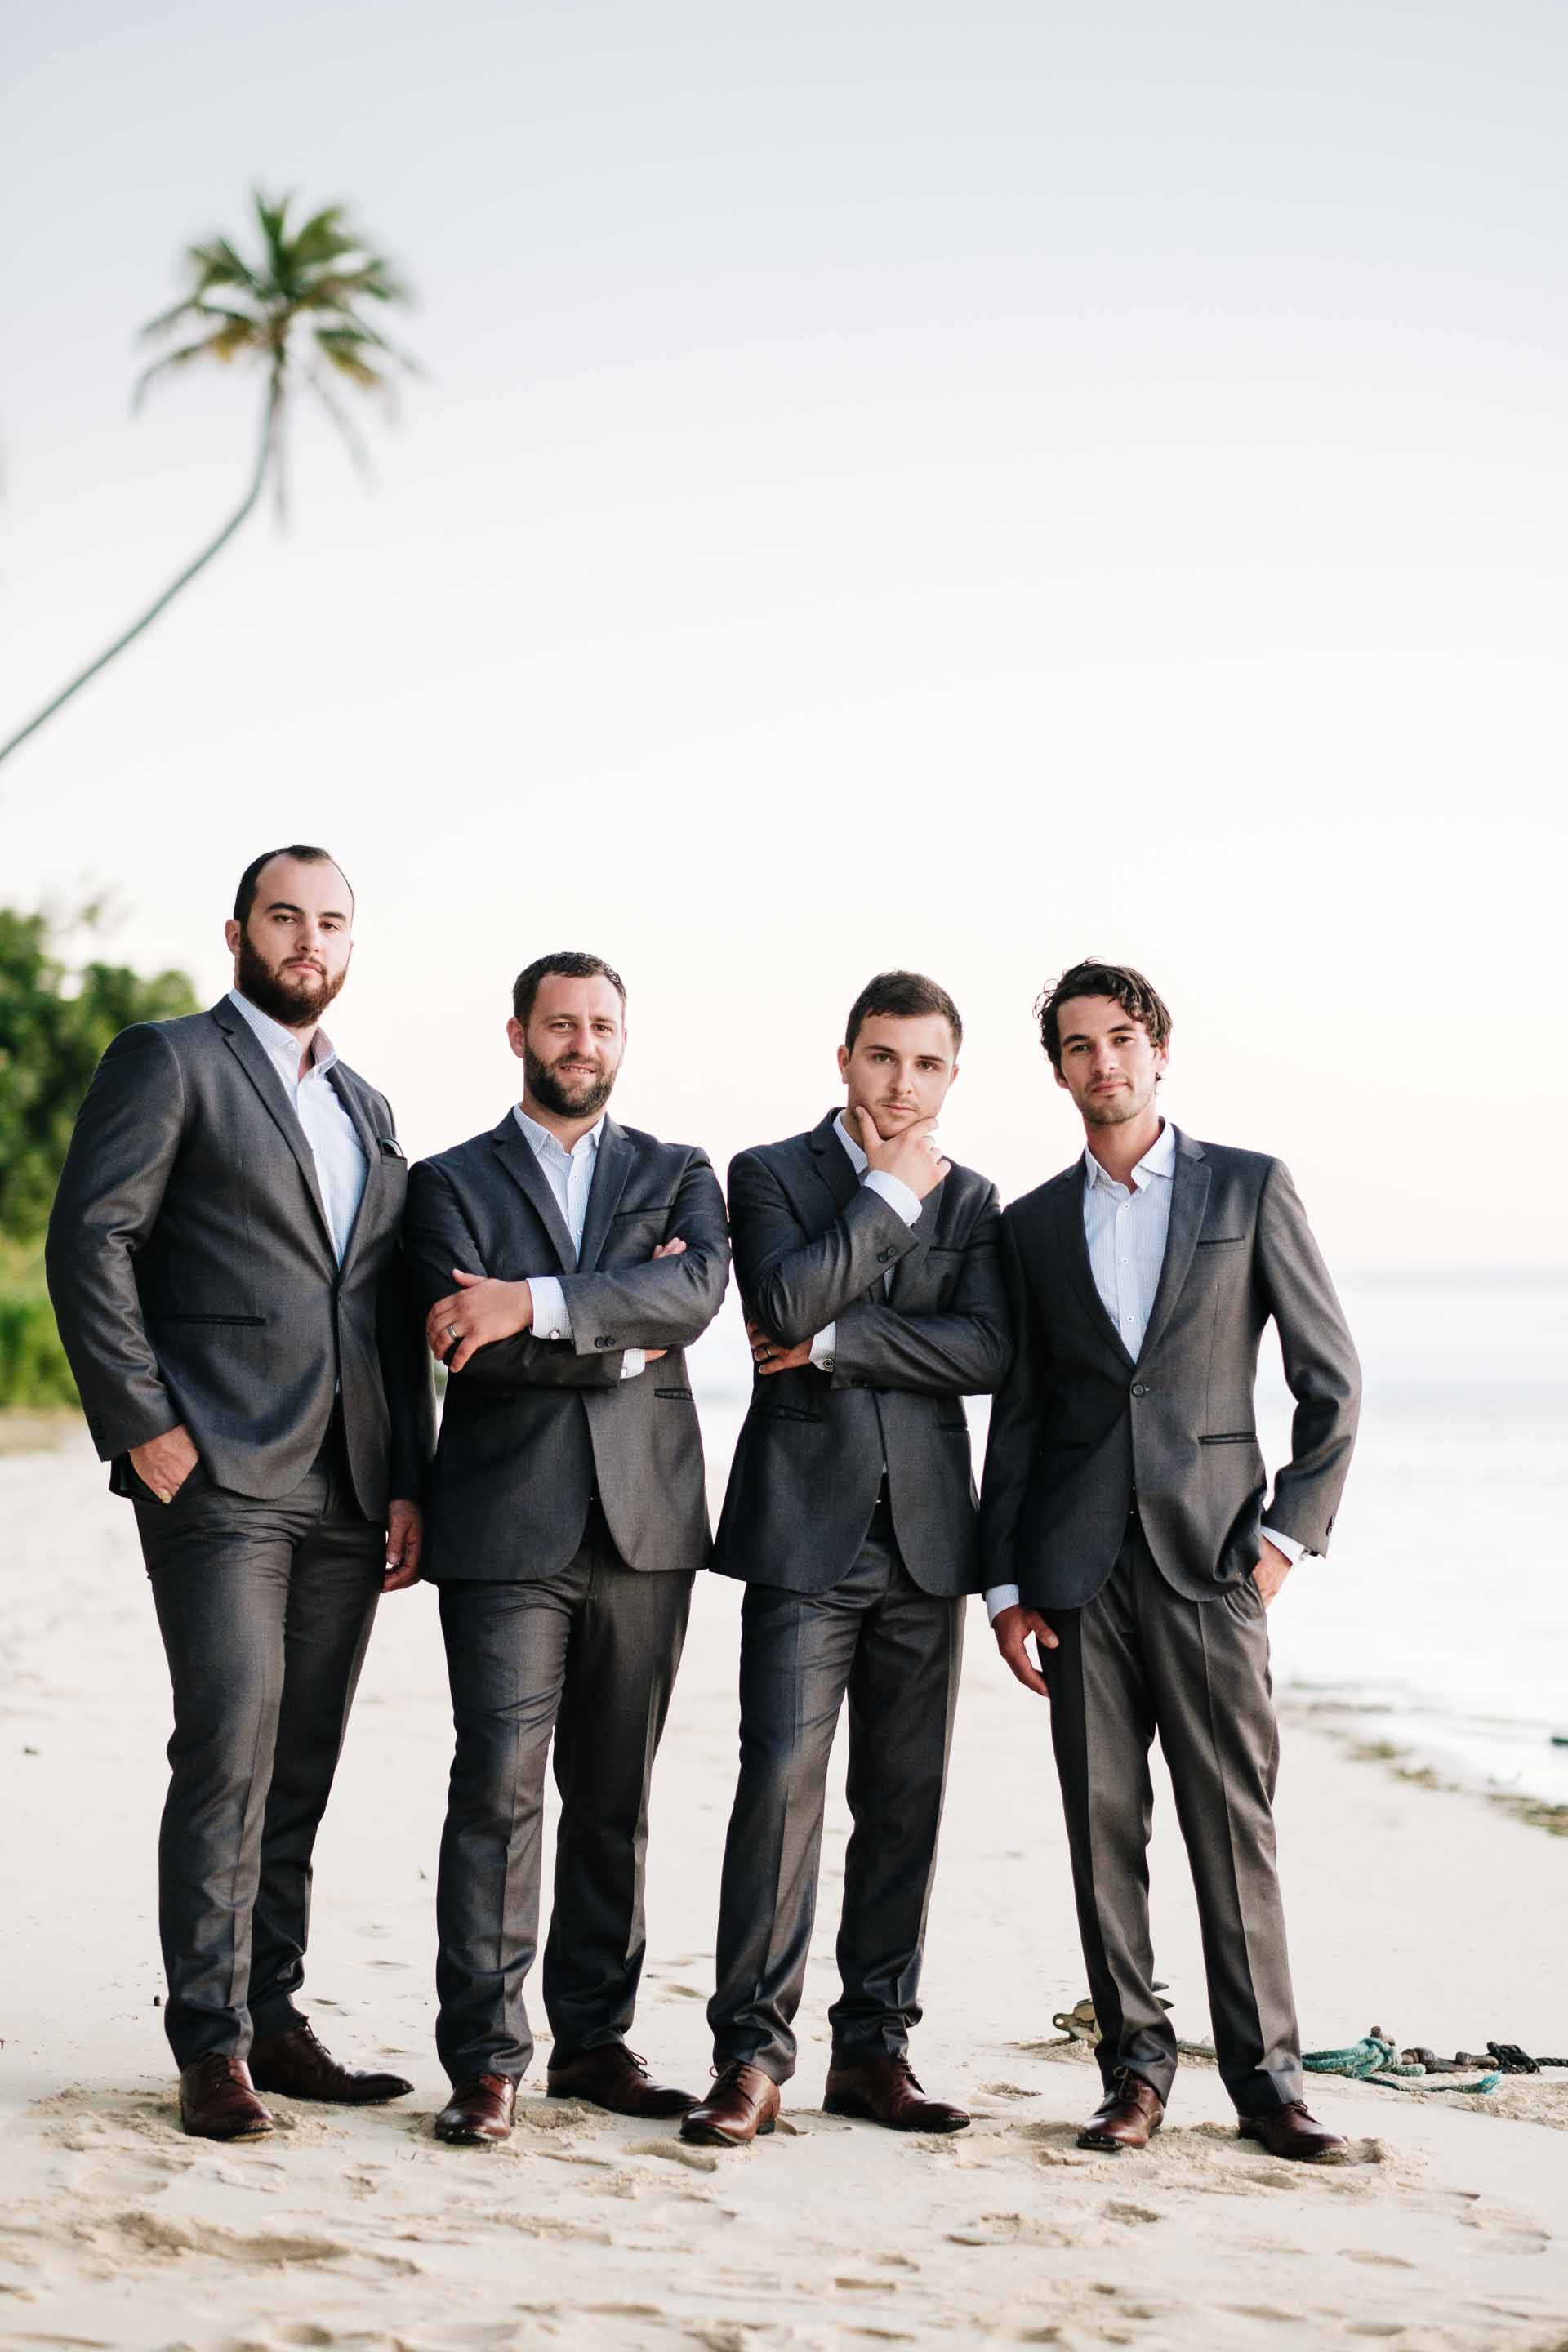 the groom and his groomsmen looking very suave on the beach at sunset